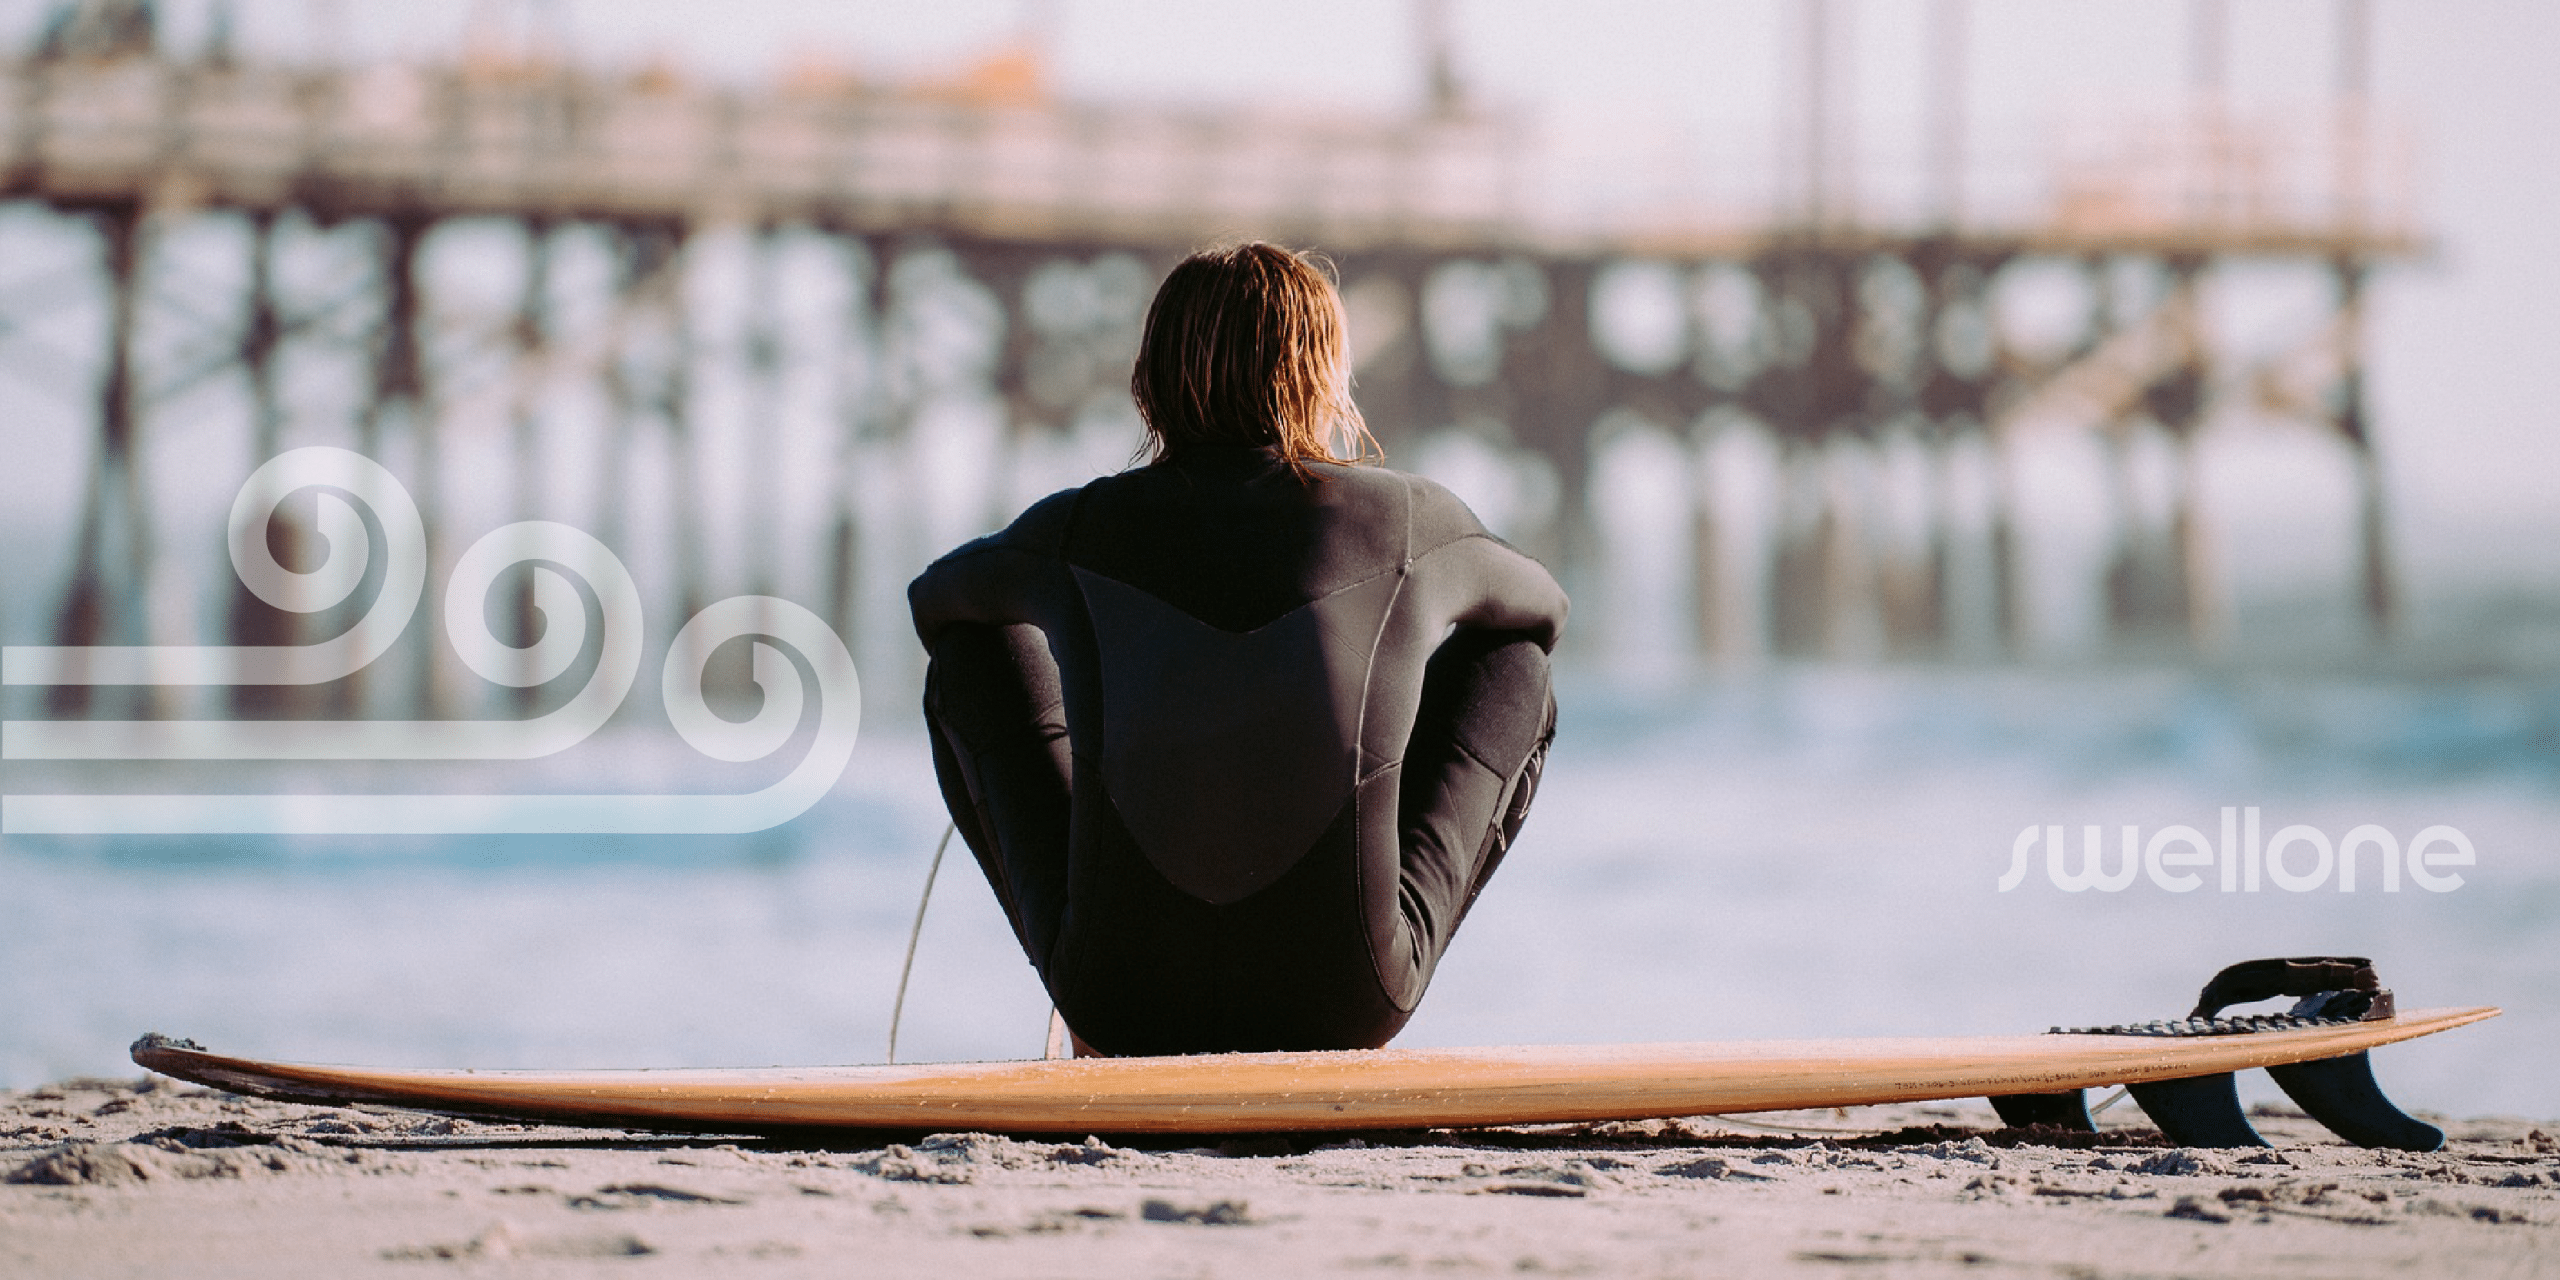 Surfer in wetsuit sitting at the water's edge with board